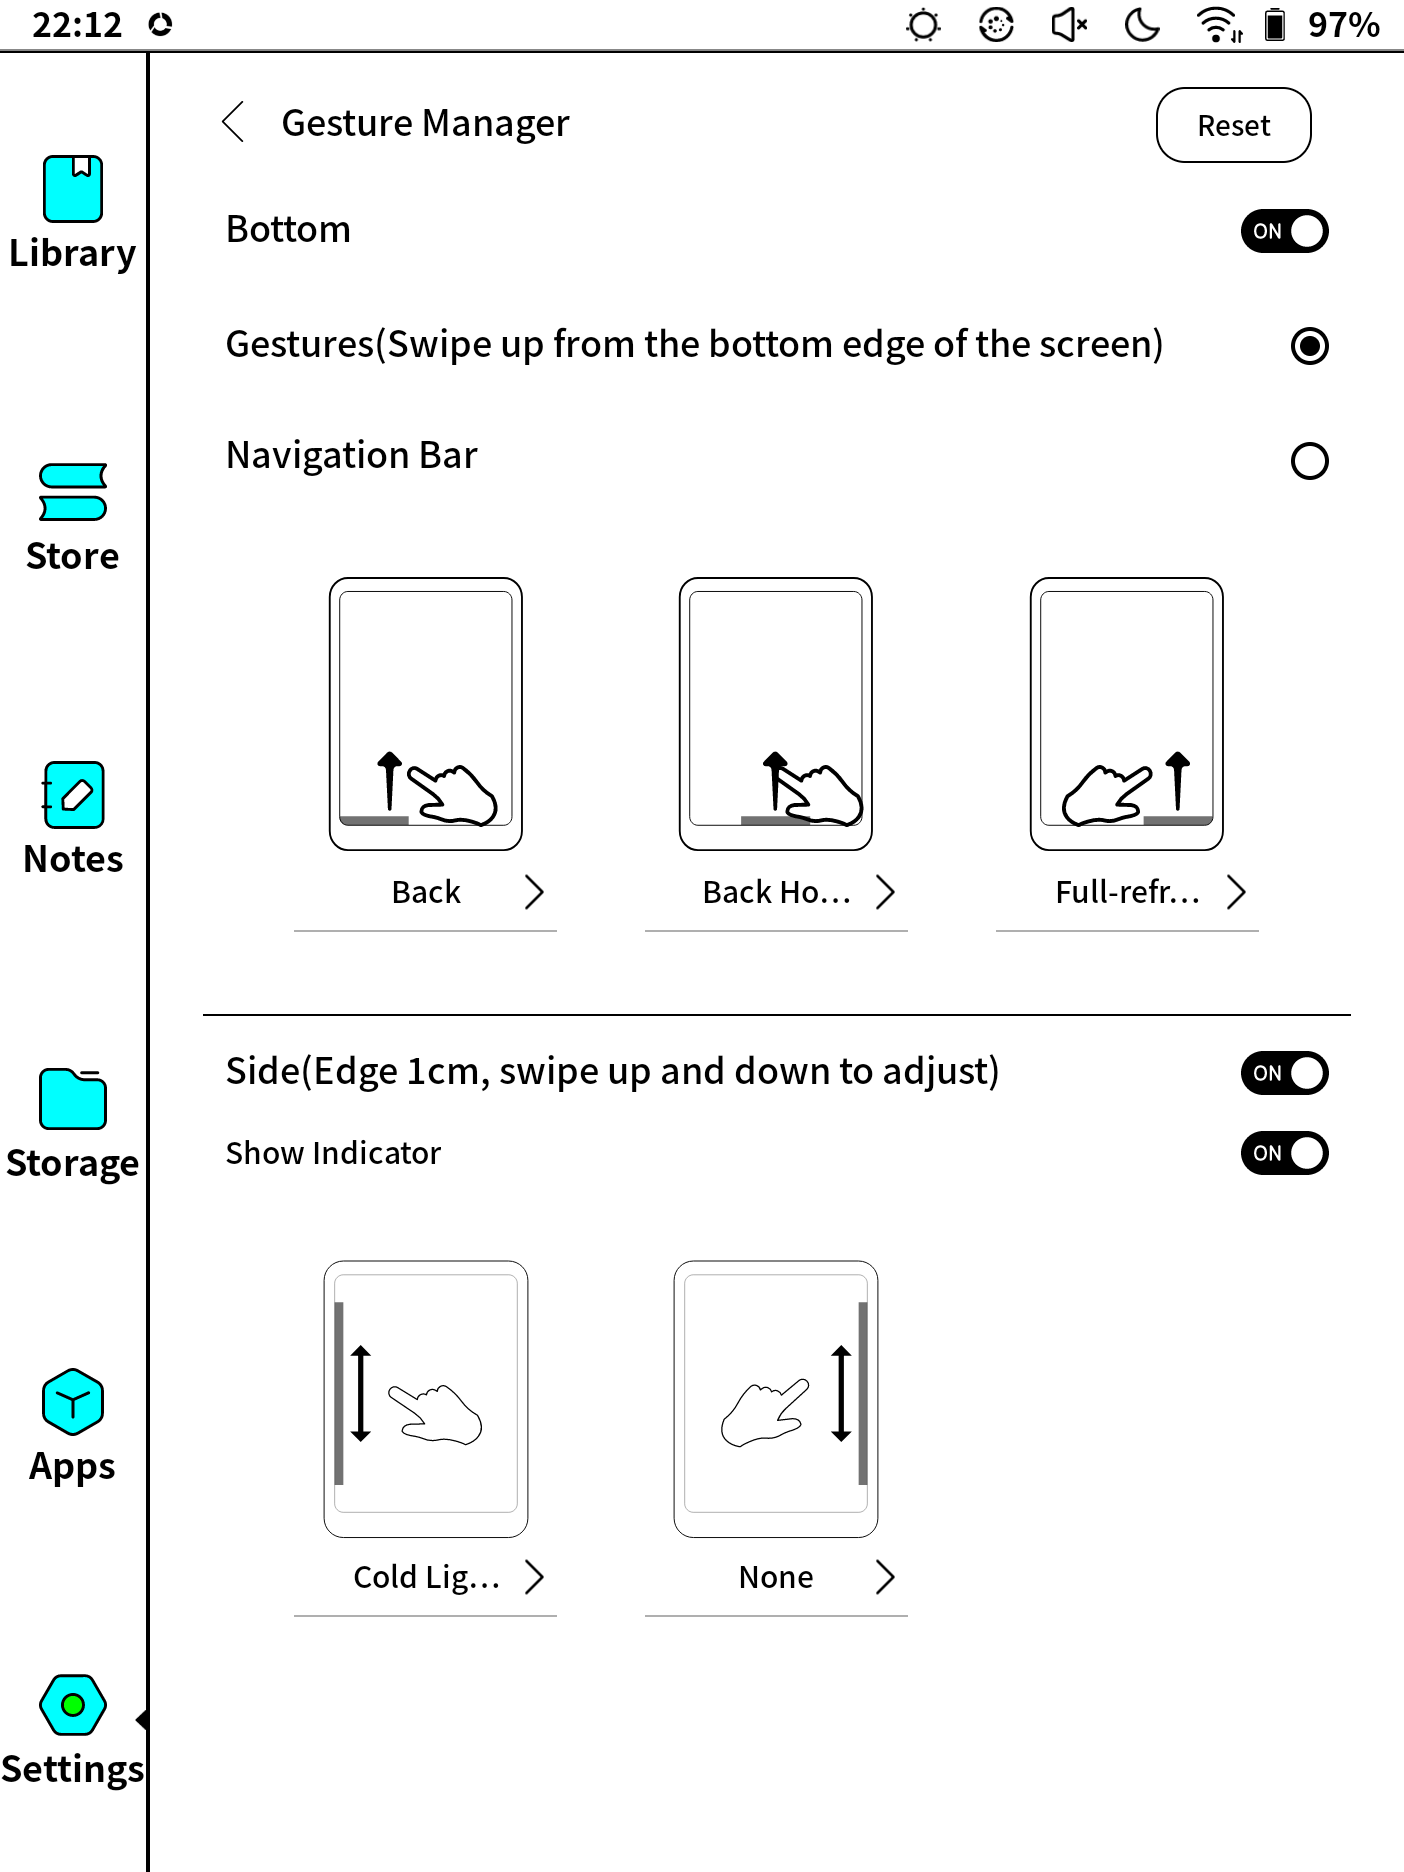 Configuration menu for the gestures. Upper half shows config for the gestures that swipe up from the bottom, left, center and right of the screen. Lower half shows config for the side scroll areas.